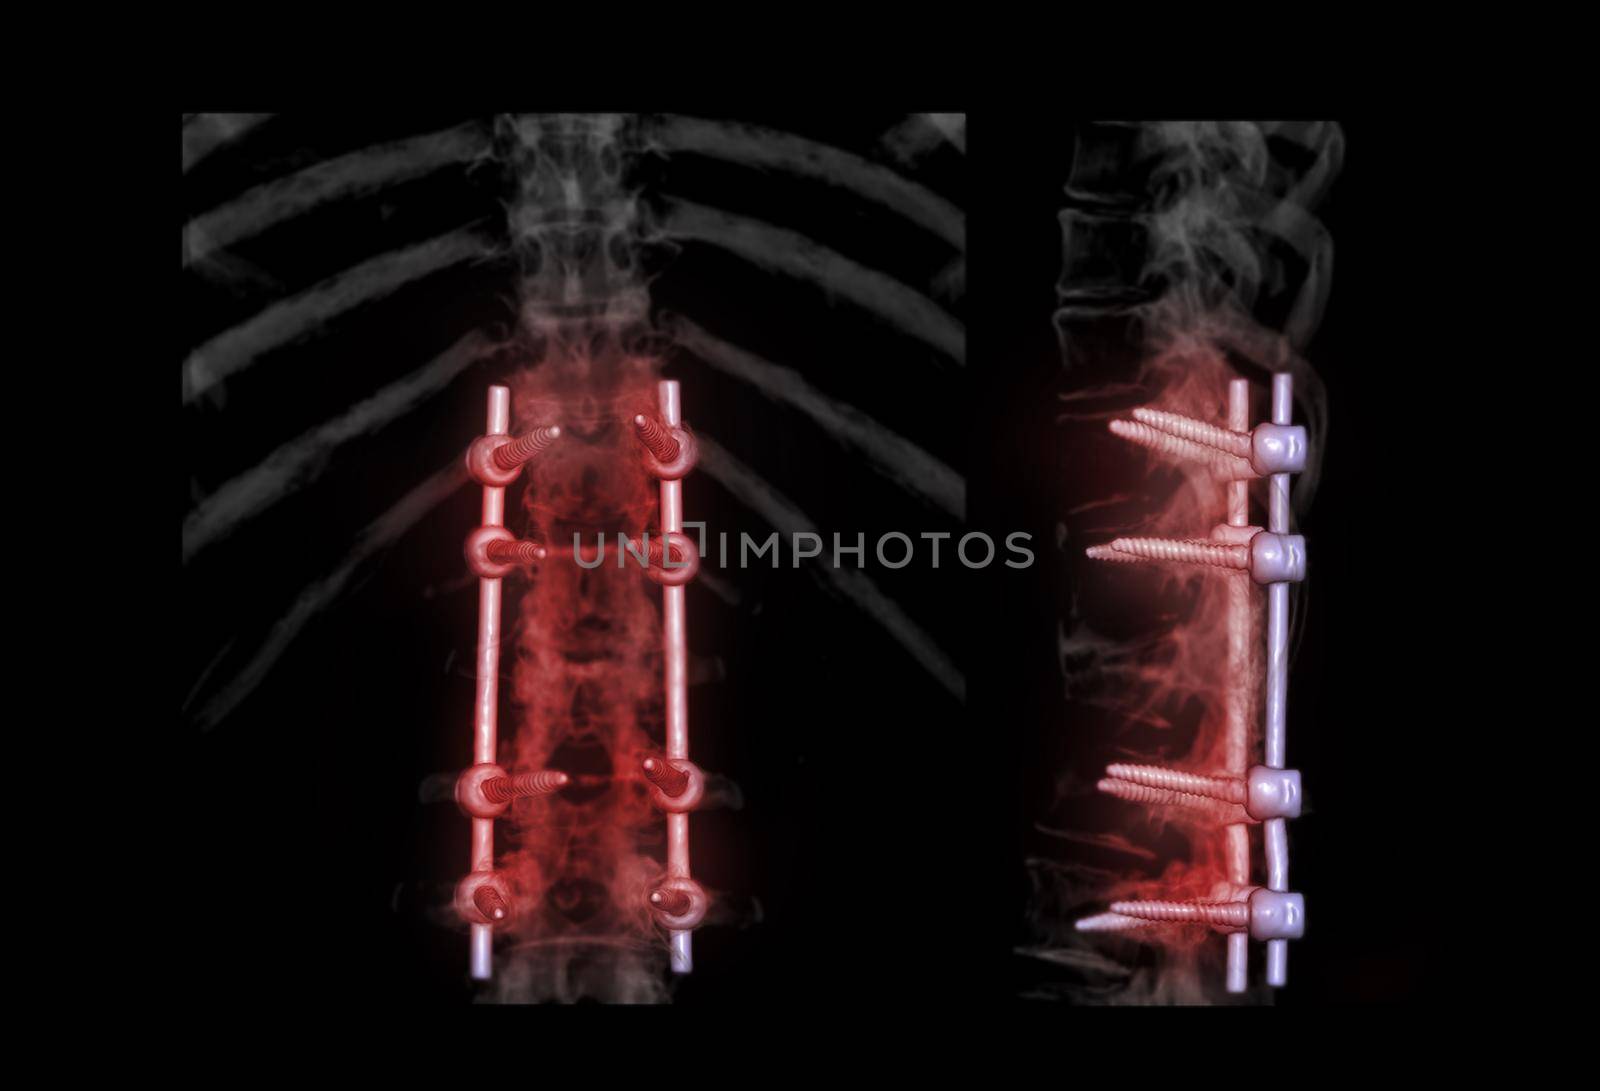 lumbar spine AP and Lateral view for diagnosis spinal canal stenosis and degenerative disc disease showing pedicle screw implant after surgical decompression and spinal fusion.